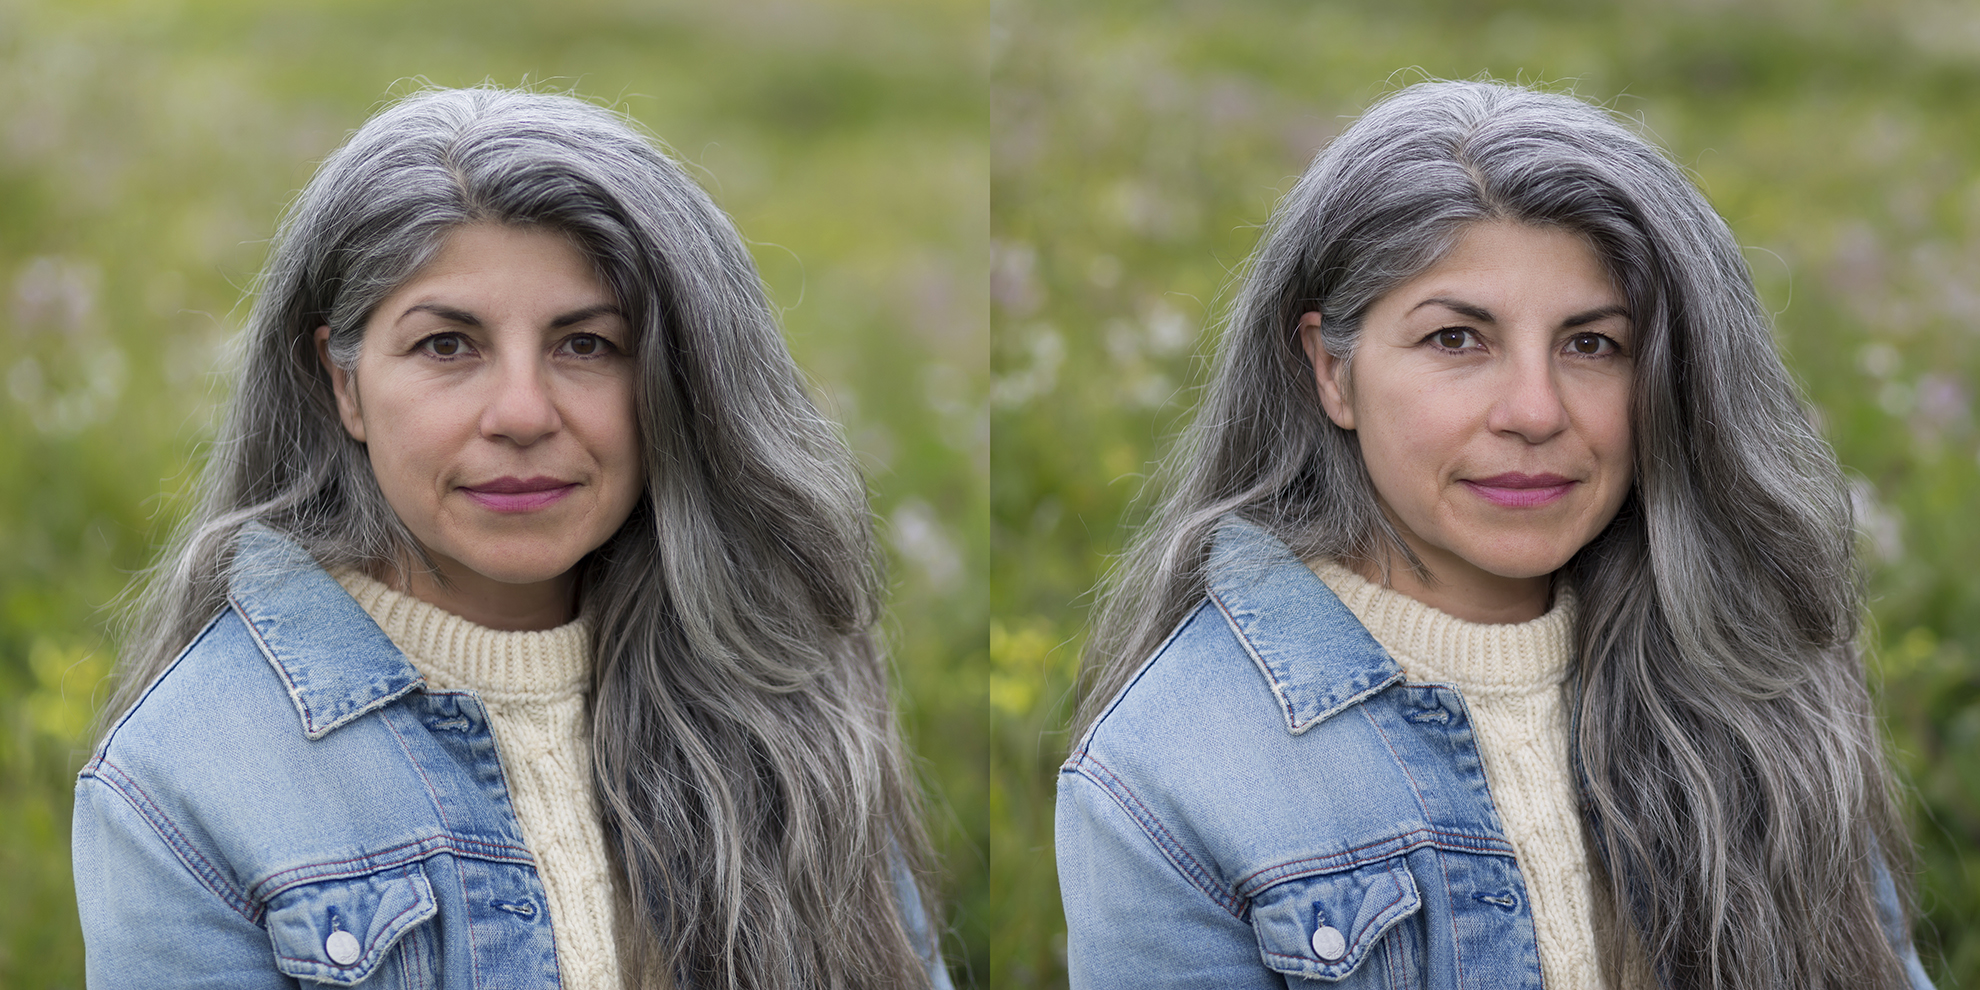 Two portraits of a woman, photo on the right using Speedlite